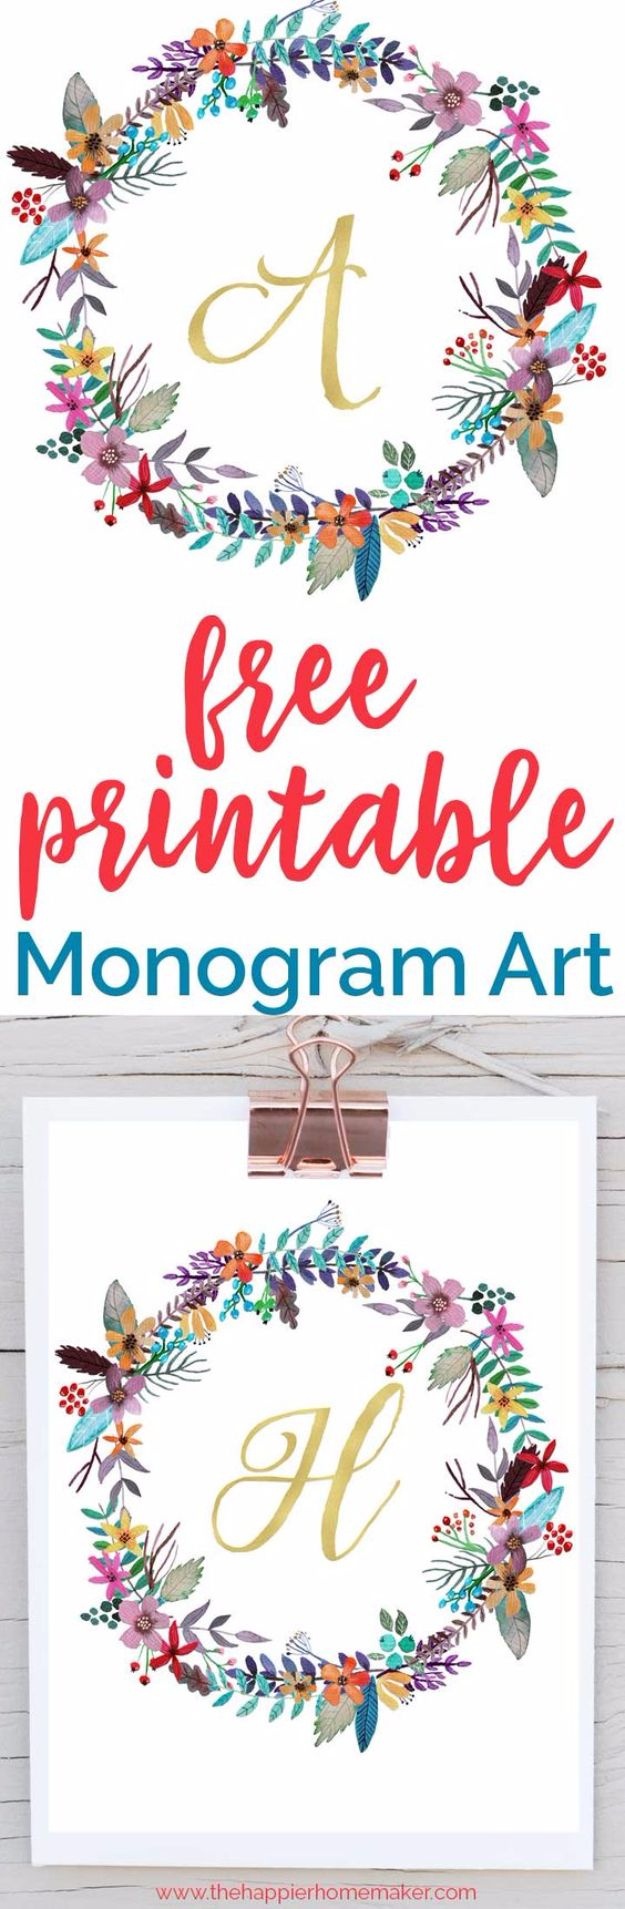 35 Best Free Printables For Your Walls - Free Printable Wall Decor